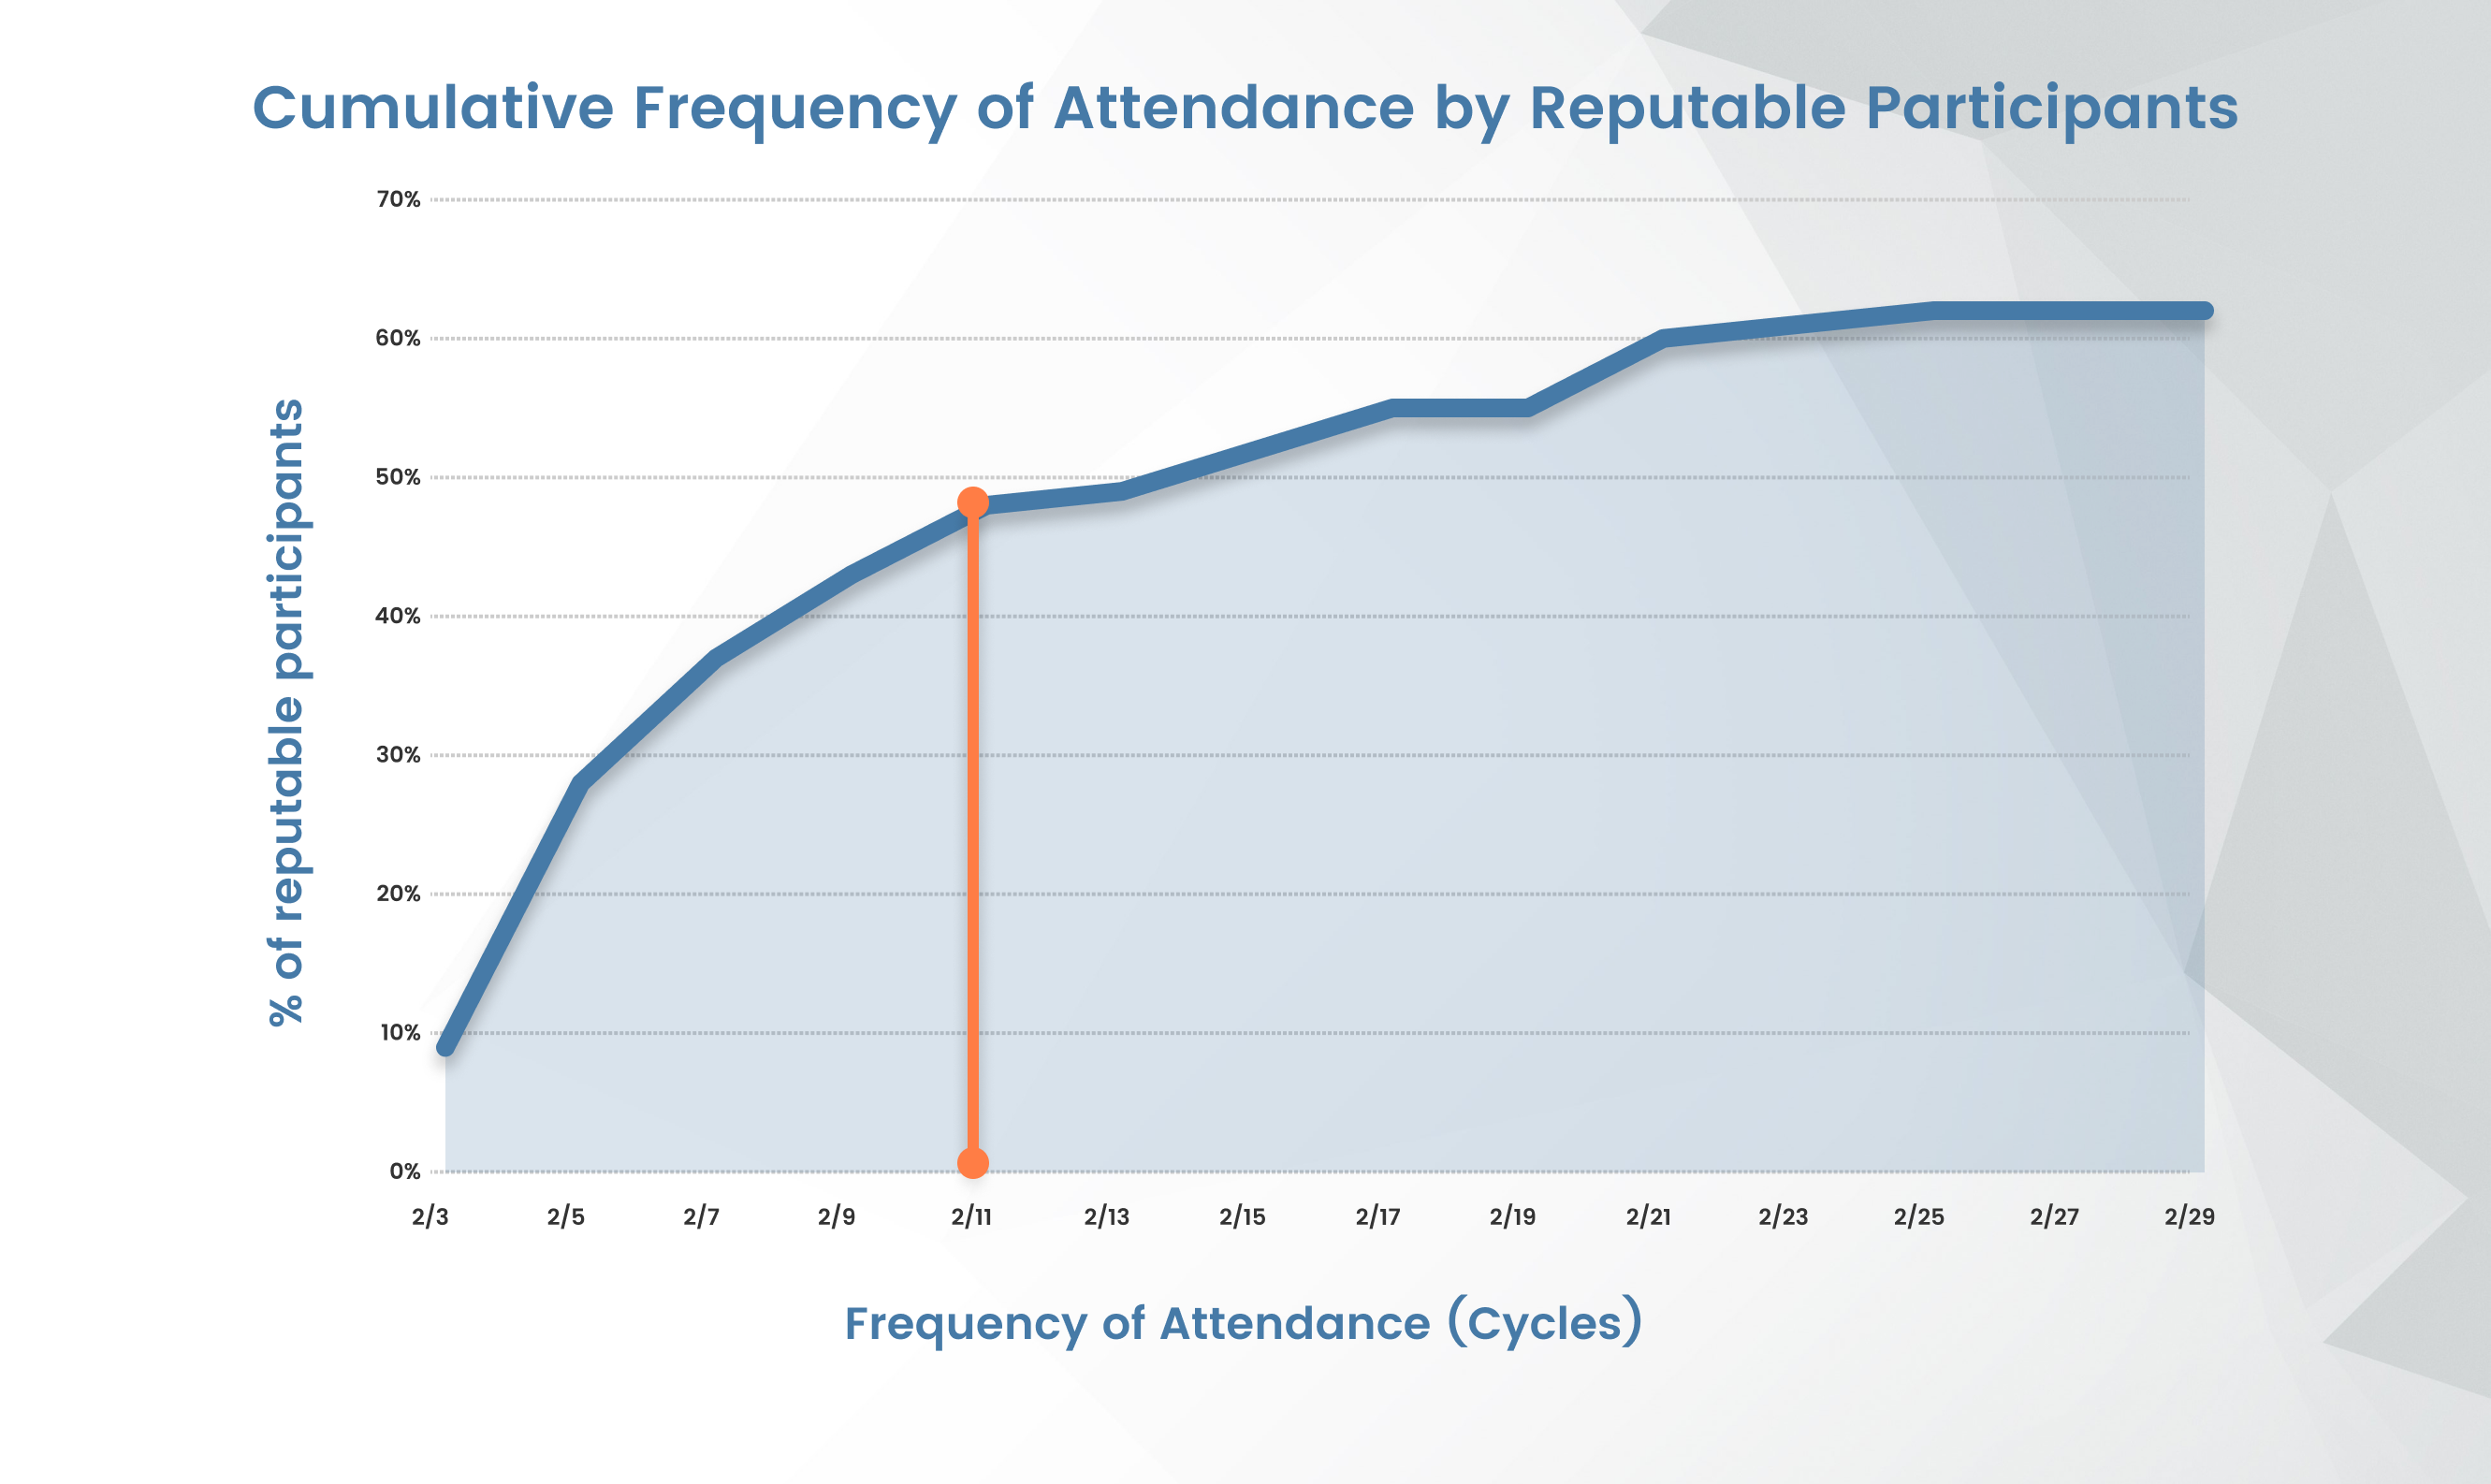 Figure 3: Cumulative frequency of attendance by reputable participants